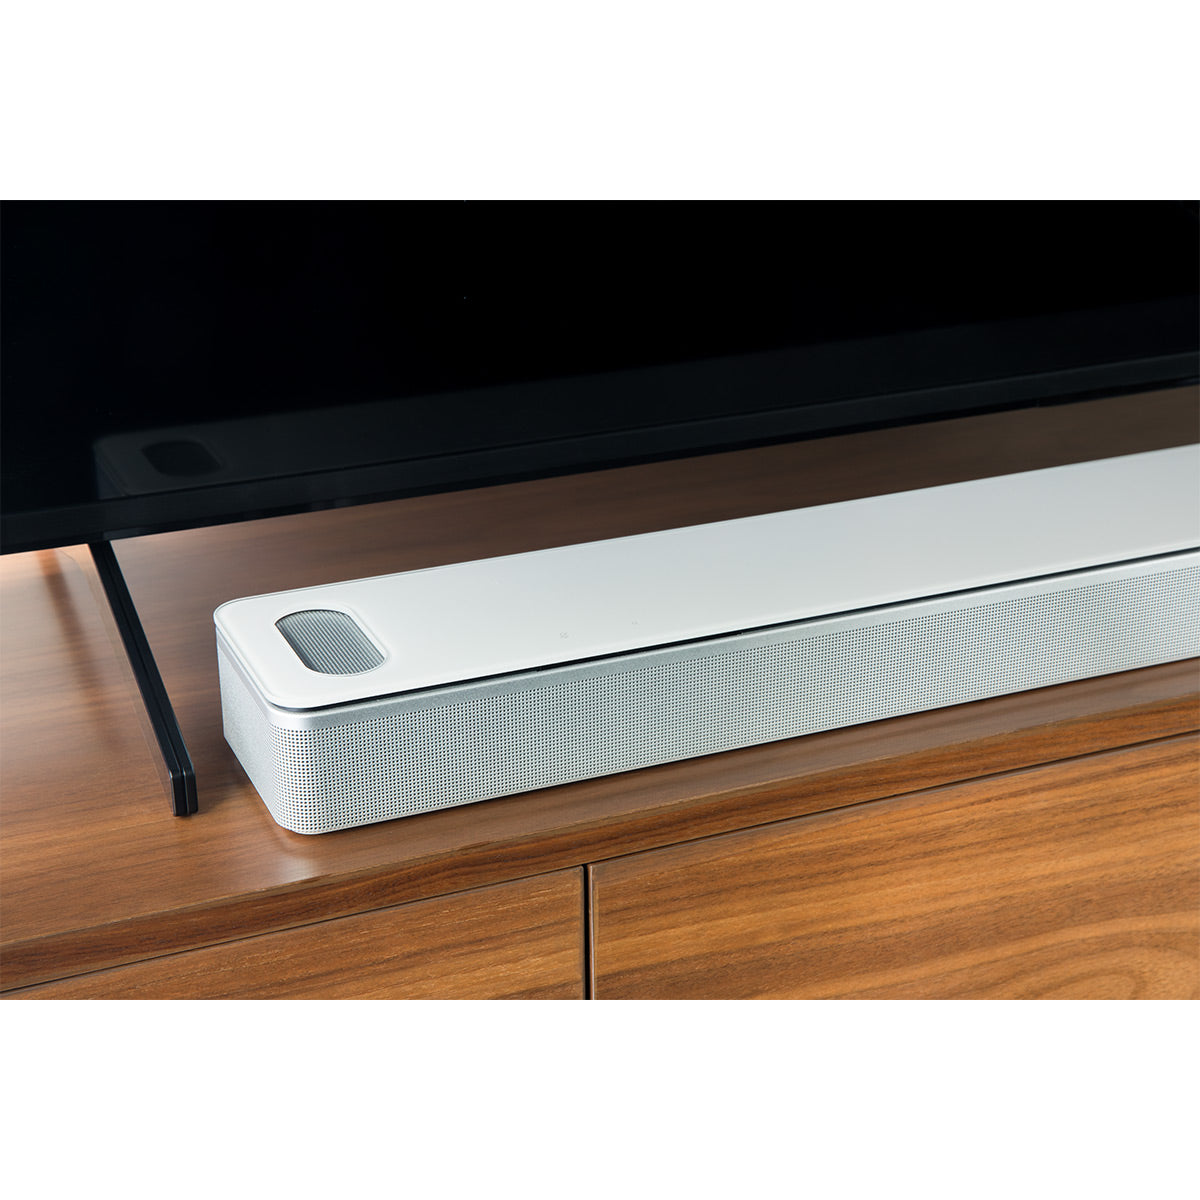 Bose Soundbar 900 Home Theater System with Bass Module 700 Subwoofer  (White) | World Wide Stereo